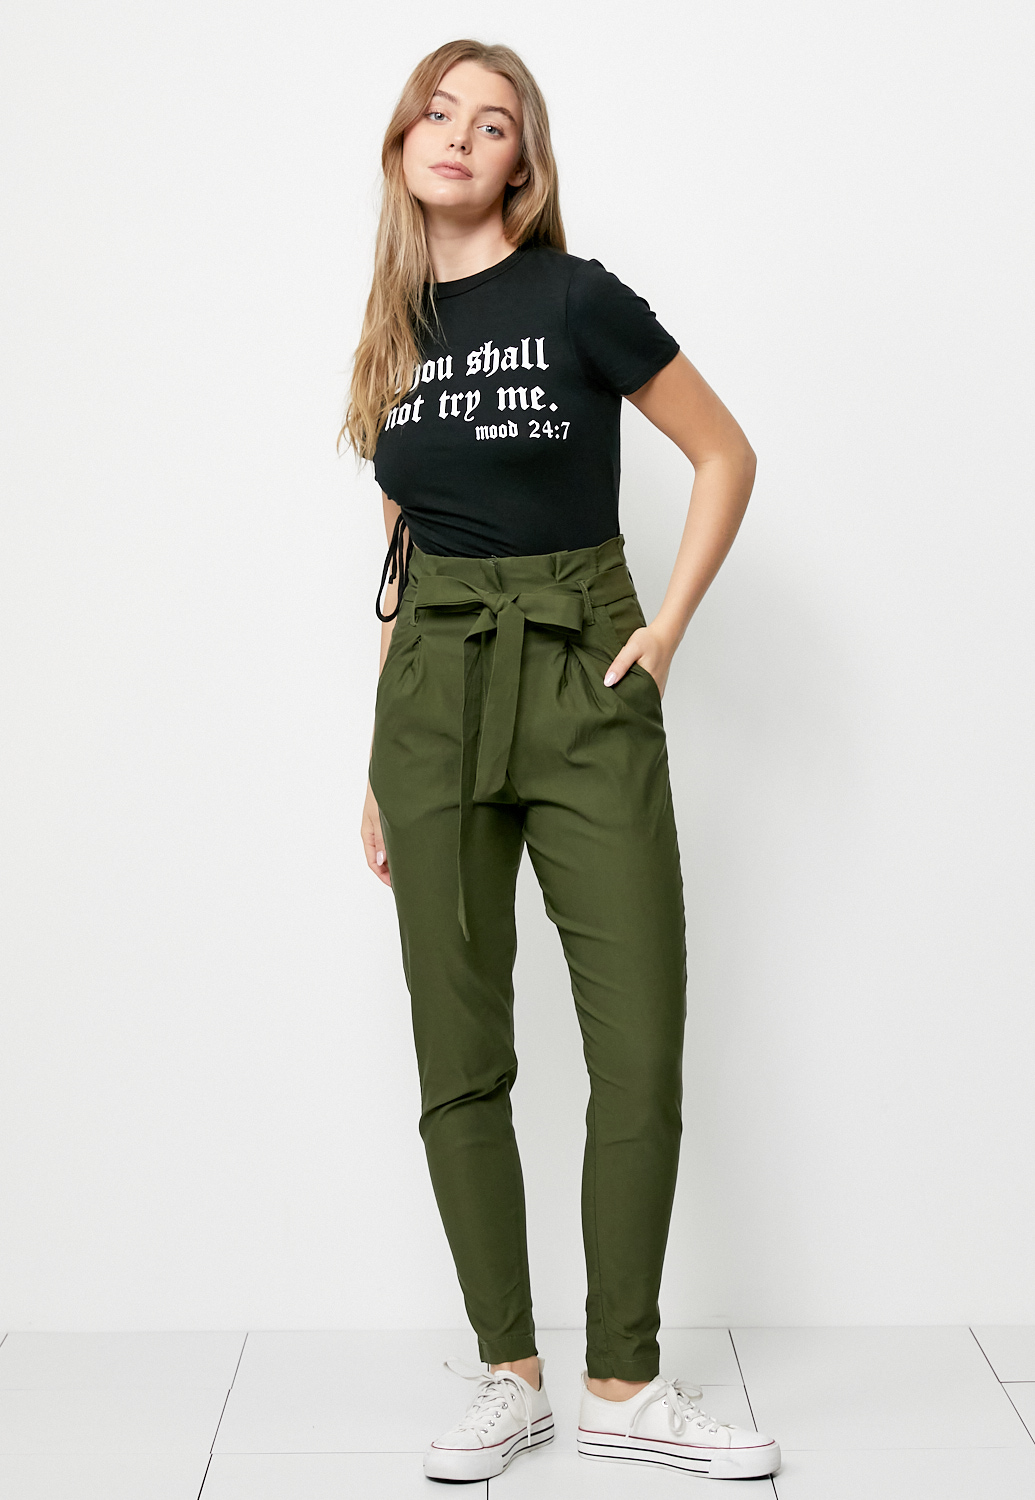 High Waisted Tie Front Dressy Pants